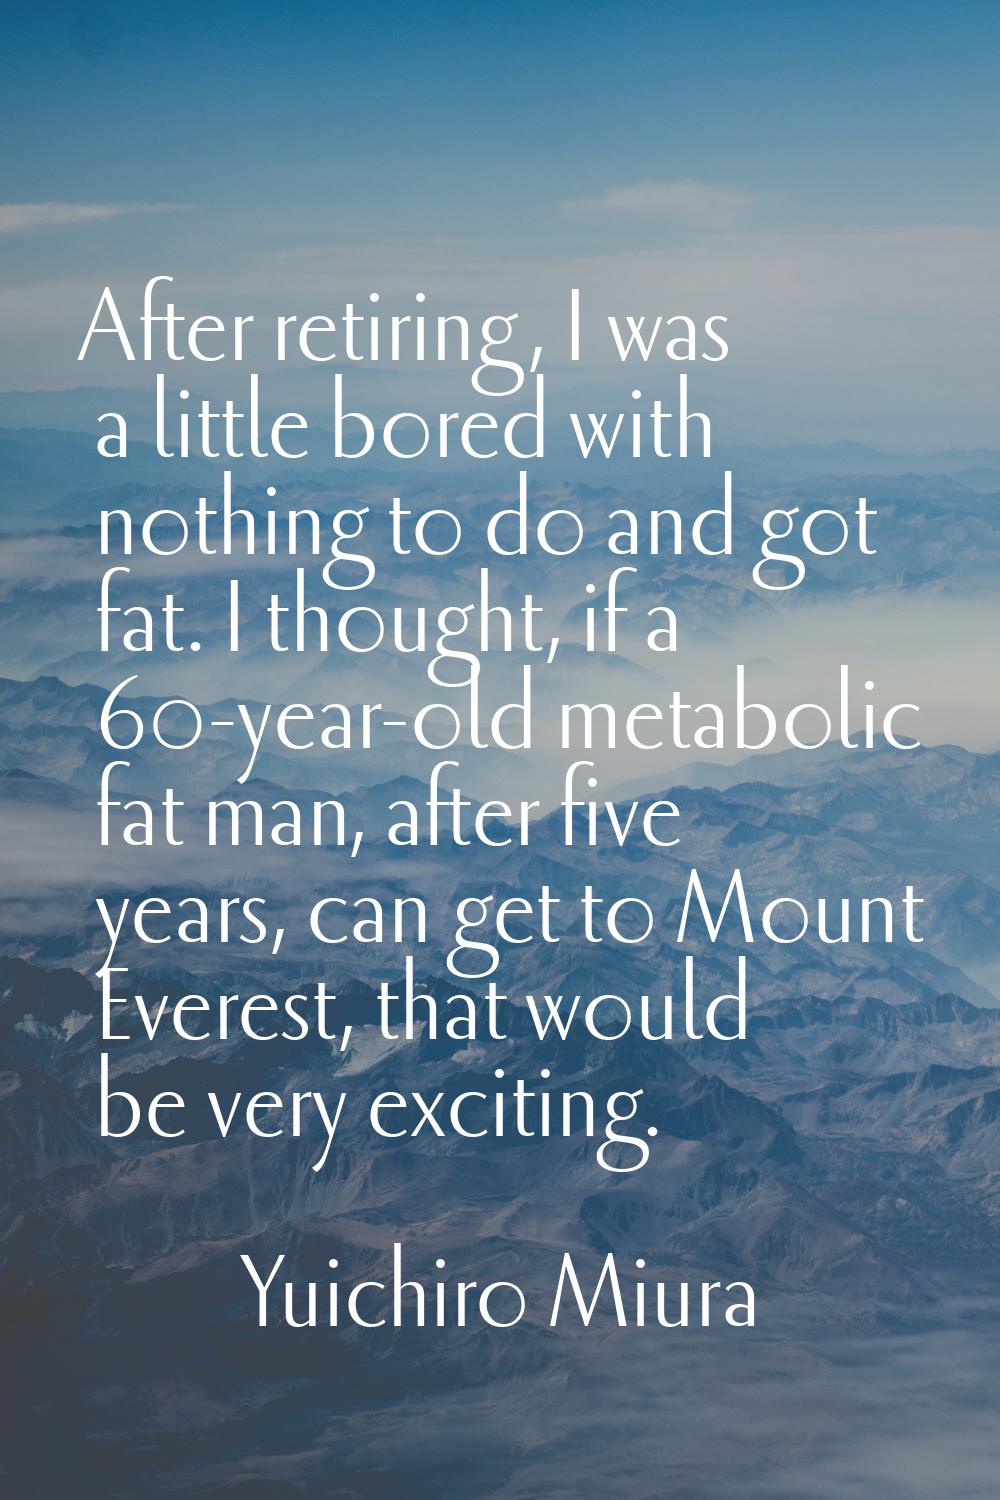 After retiring, I was a little bored with nothing to do and got fat. I thought, if a 60-year-old me